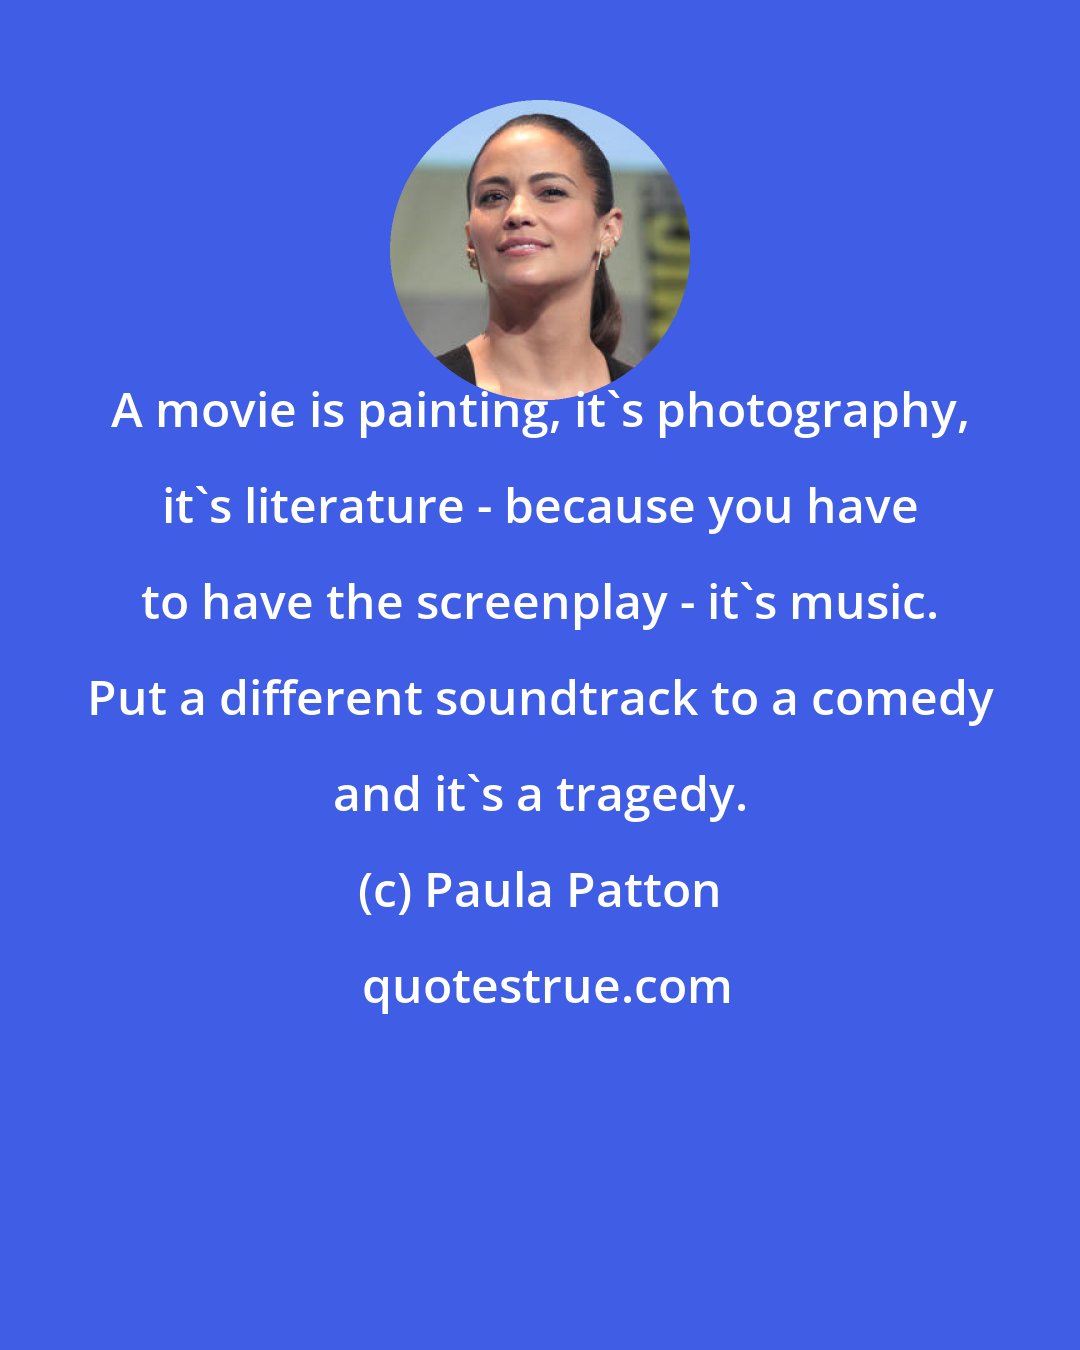 Paula Patton: A movie is painting, it's photography, it's literature - because you have to have the screenplay - it's music. Put a different soundtrack to a comedy and it's a tragedy.